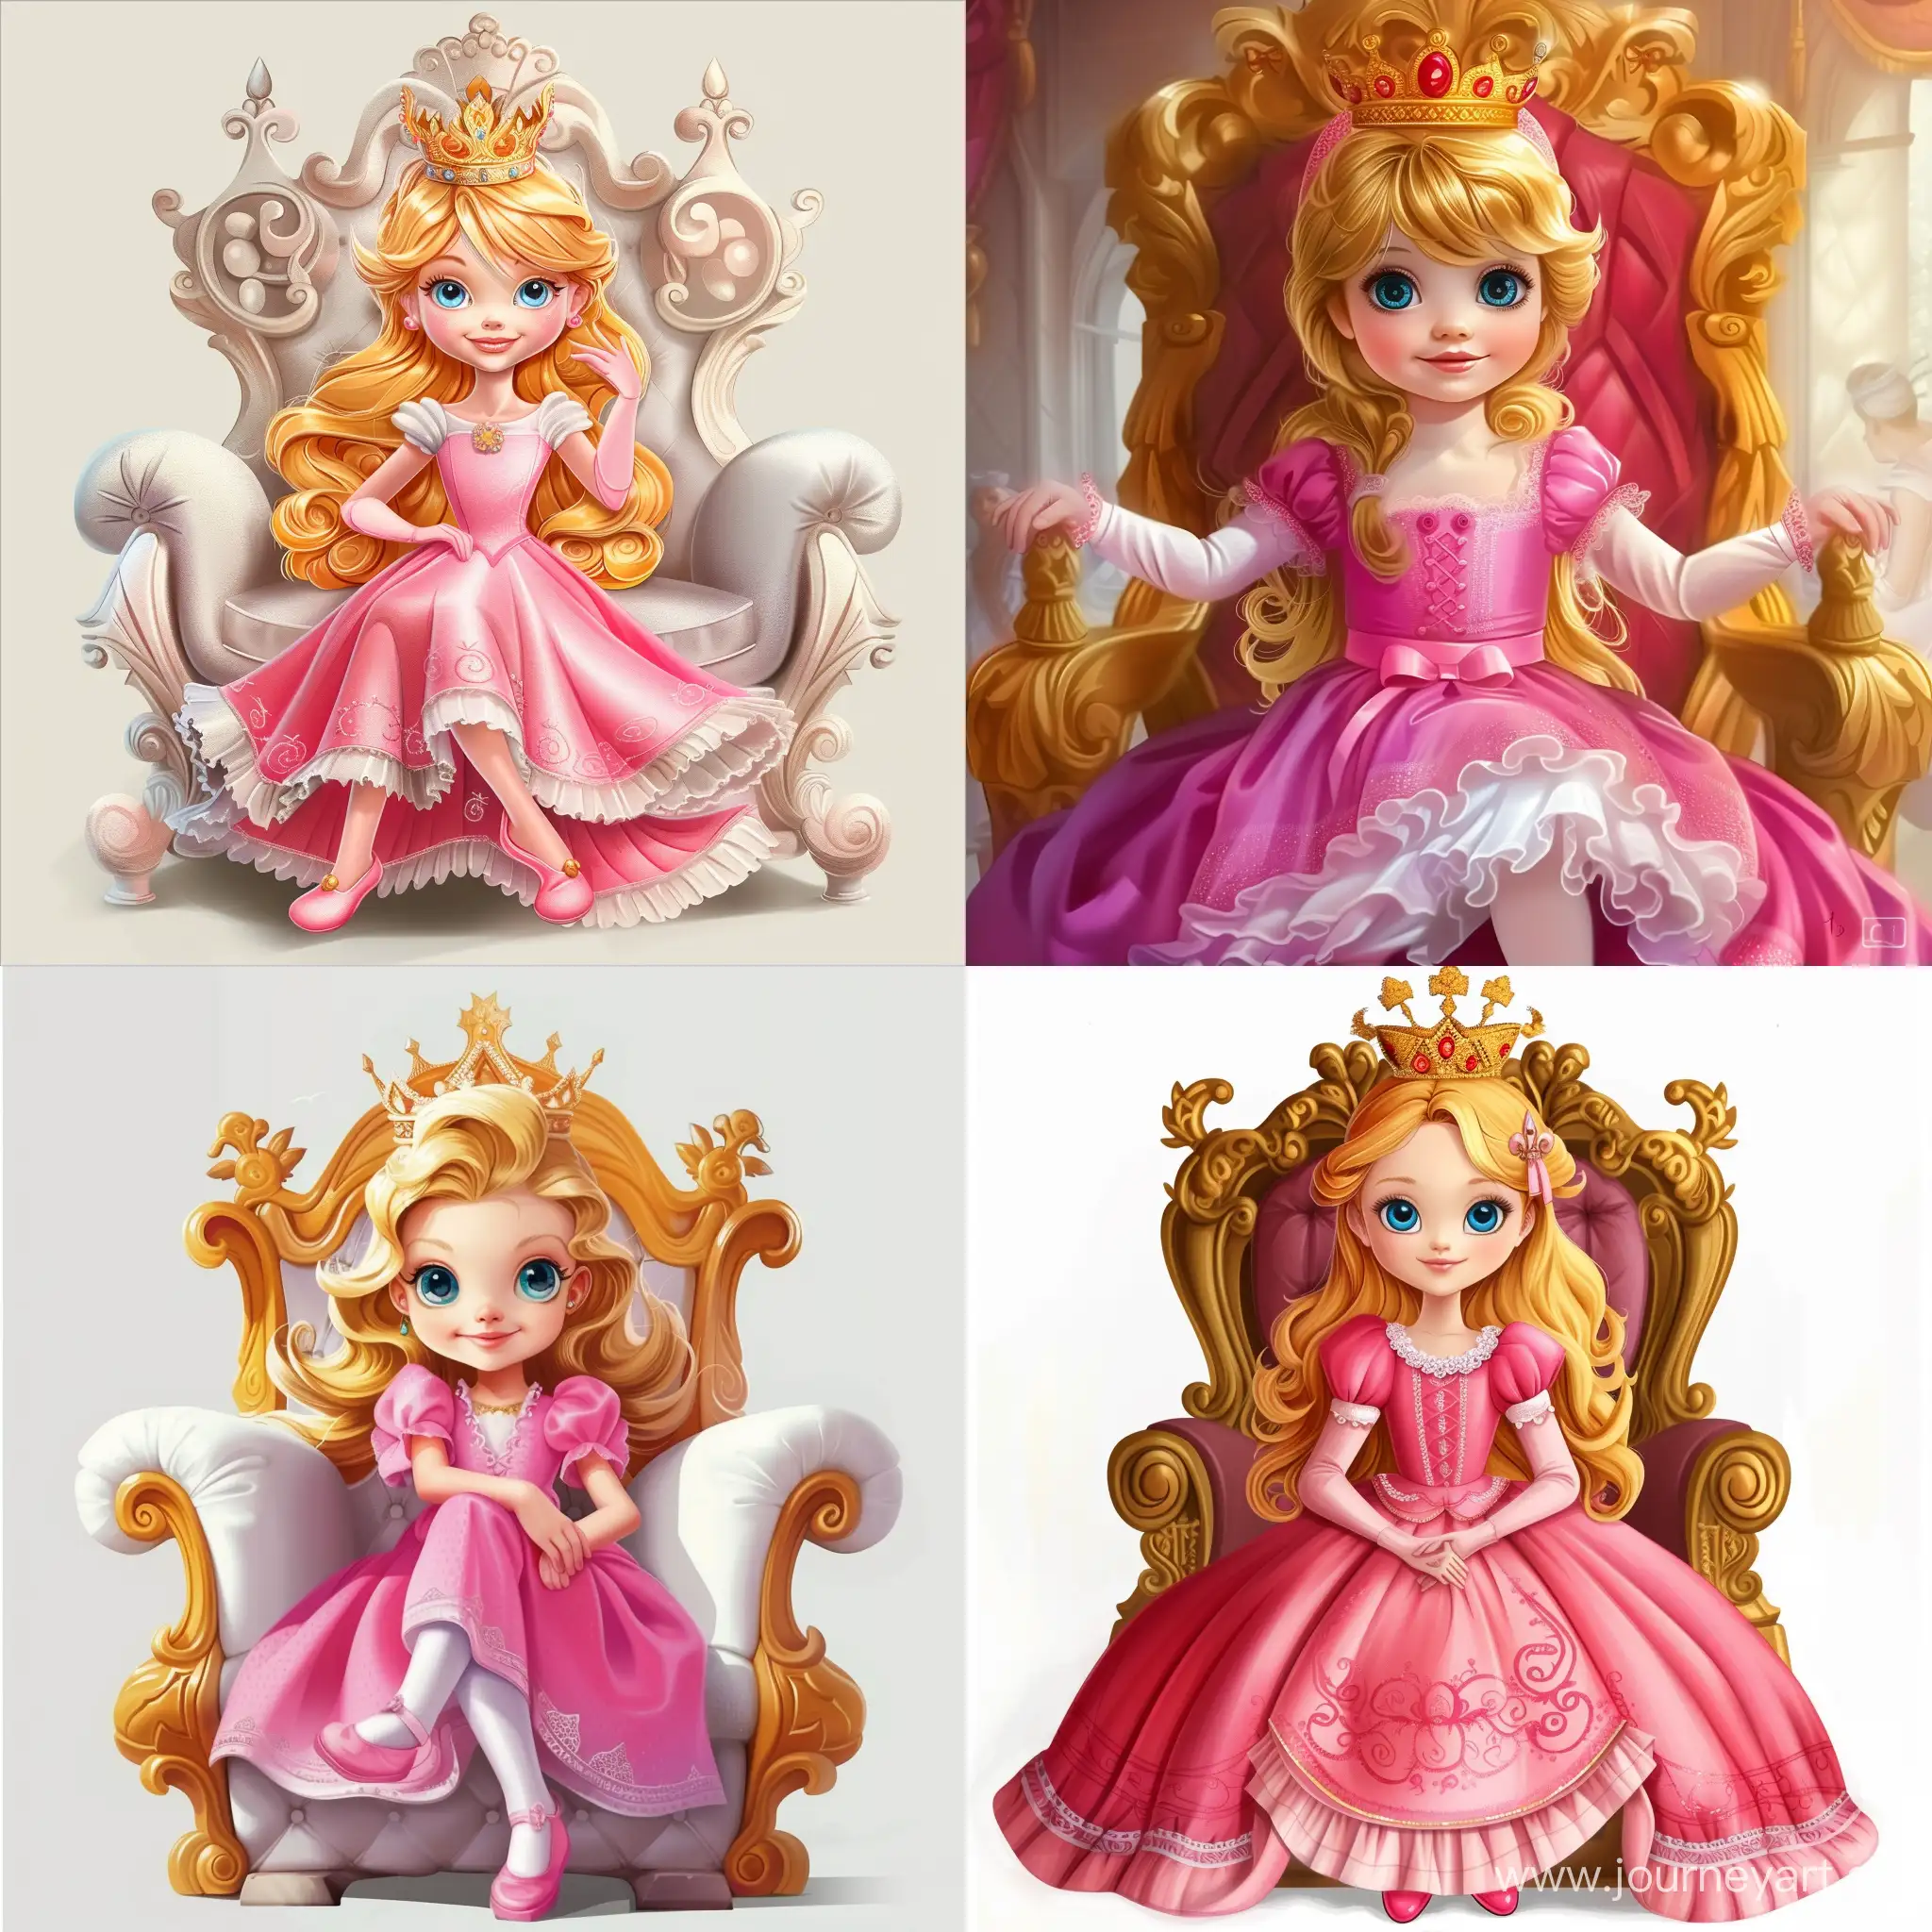 Beautiful girl, child, 6 years old, princess, sitting on the throne, pink dress, crown in her hair, golden hair, blue eyes, white skin, high quality, high detail, cartoon art